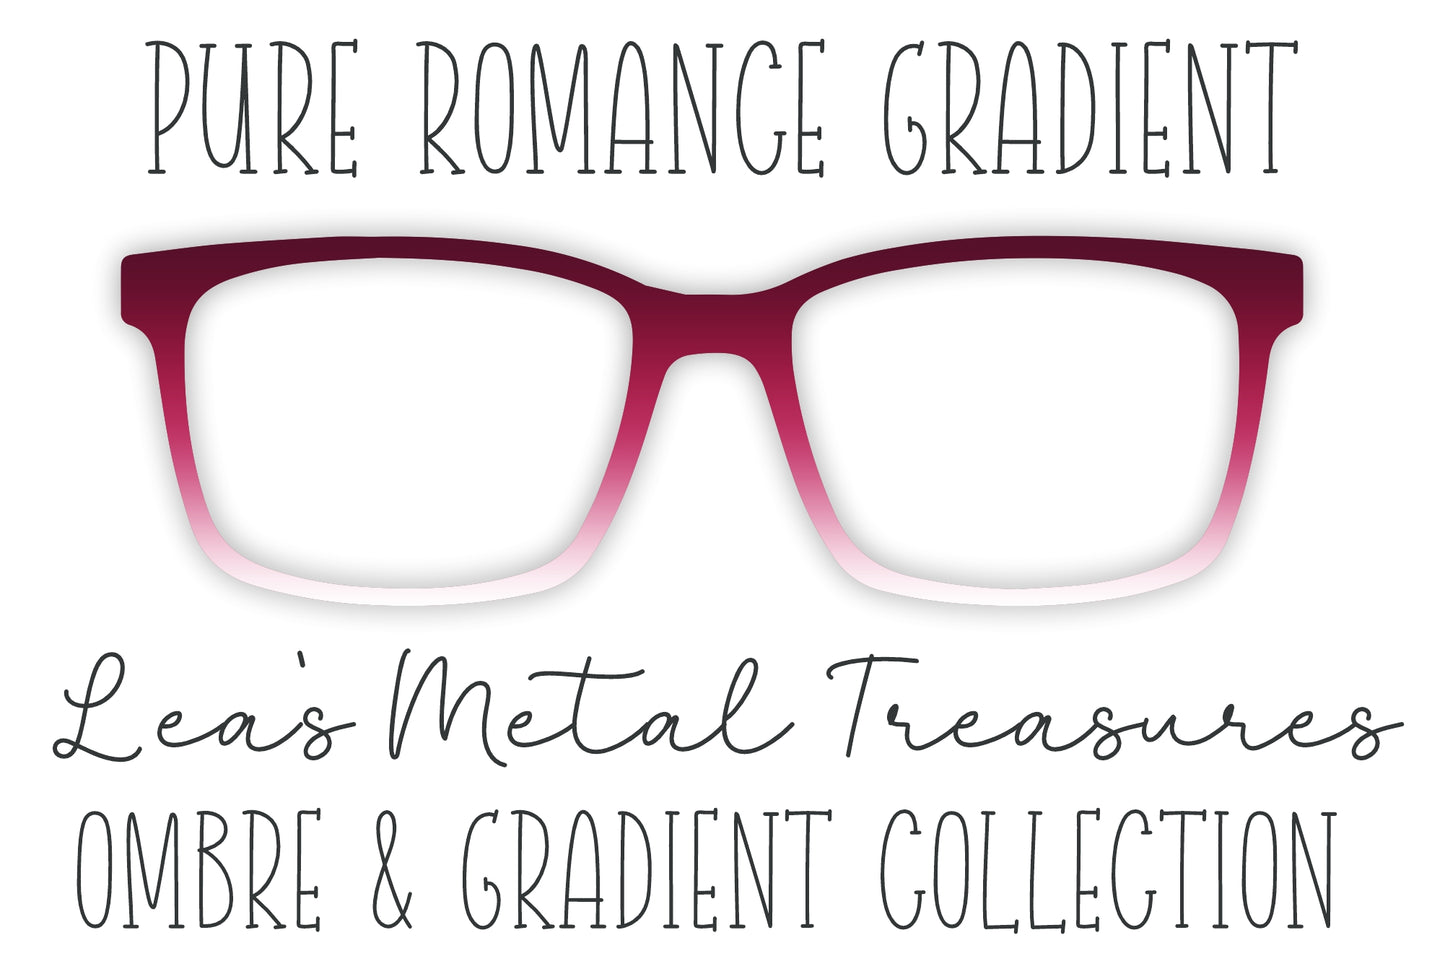 Pure Romance Gradient Eyewear Frame Toppers COMES WITH MAGNETS